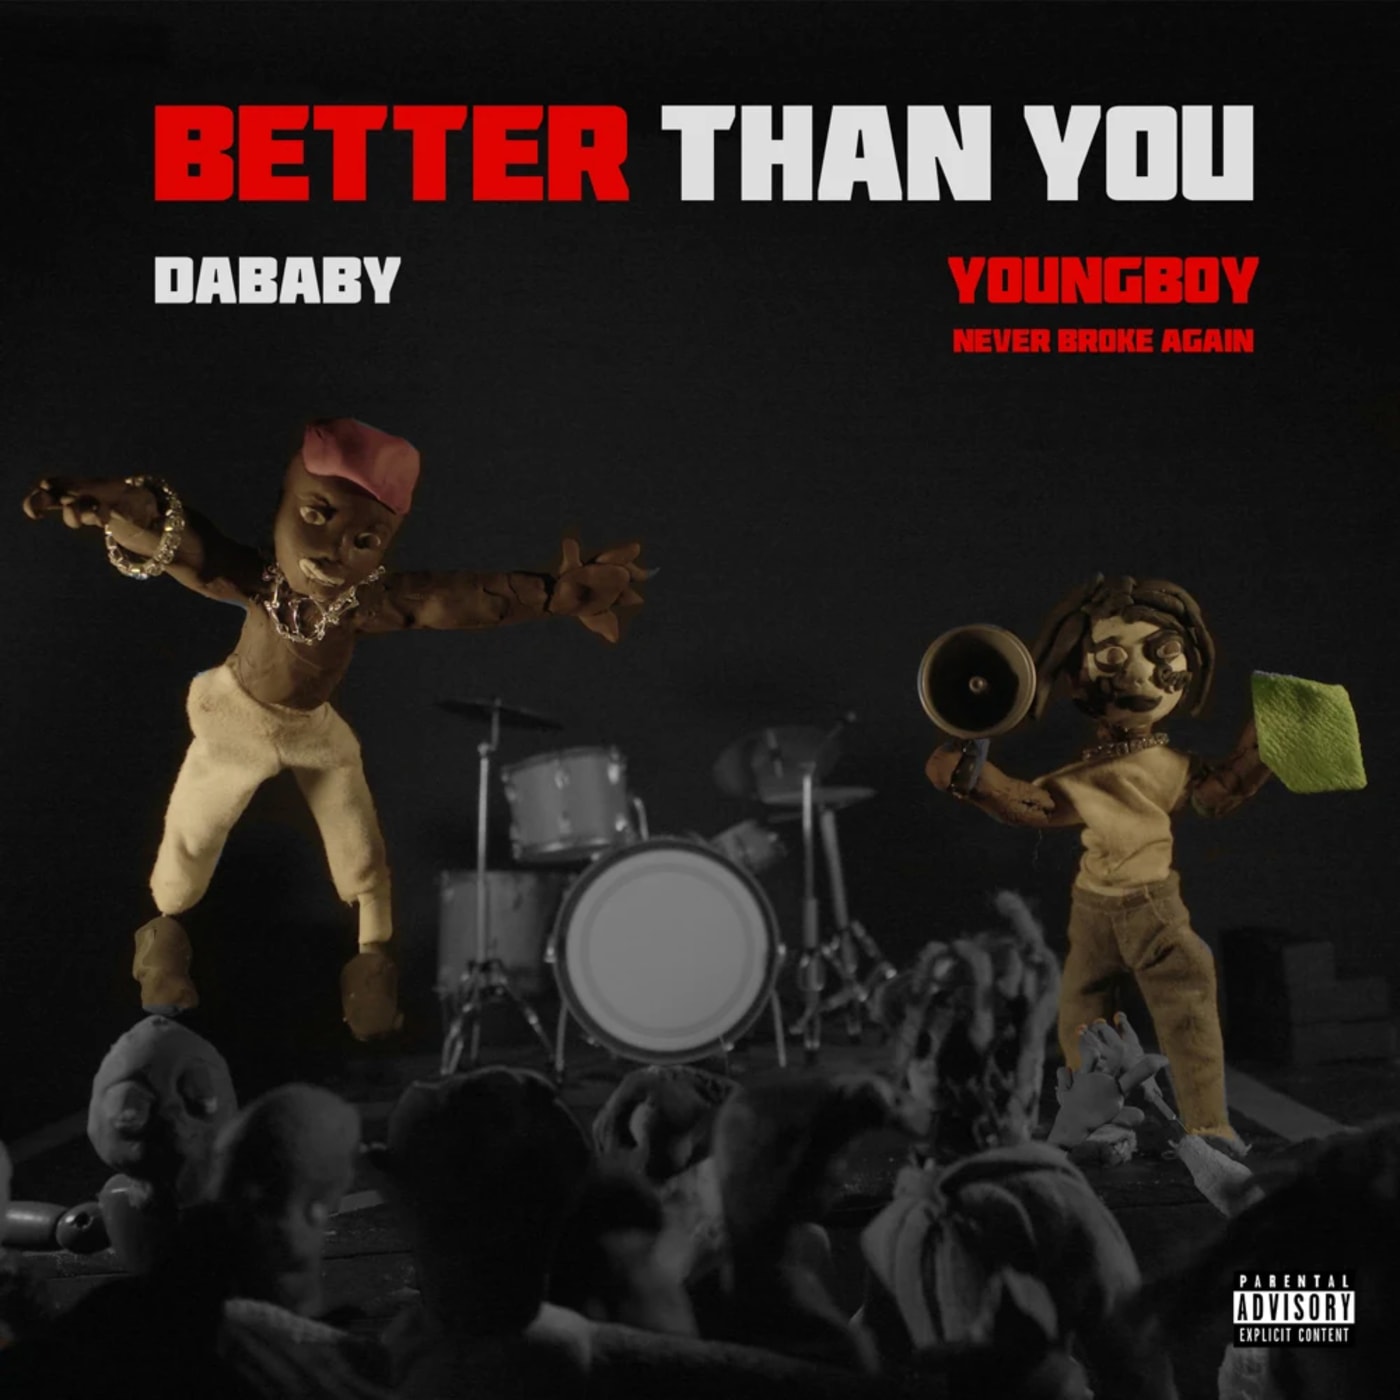 The cover art to DaBaby and YoungBoy Never Broke Again's collaborative project.